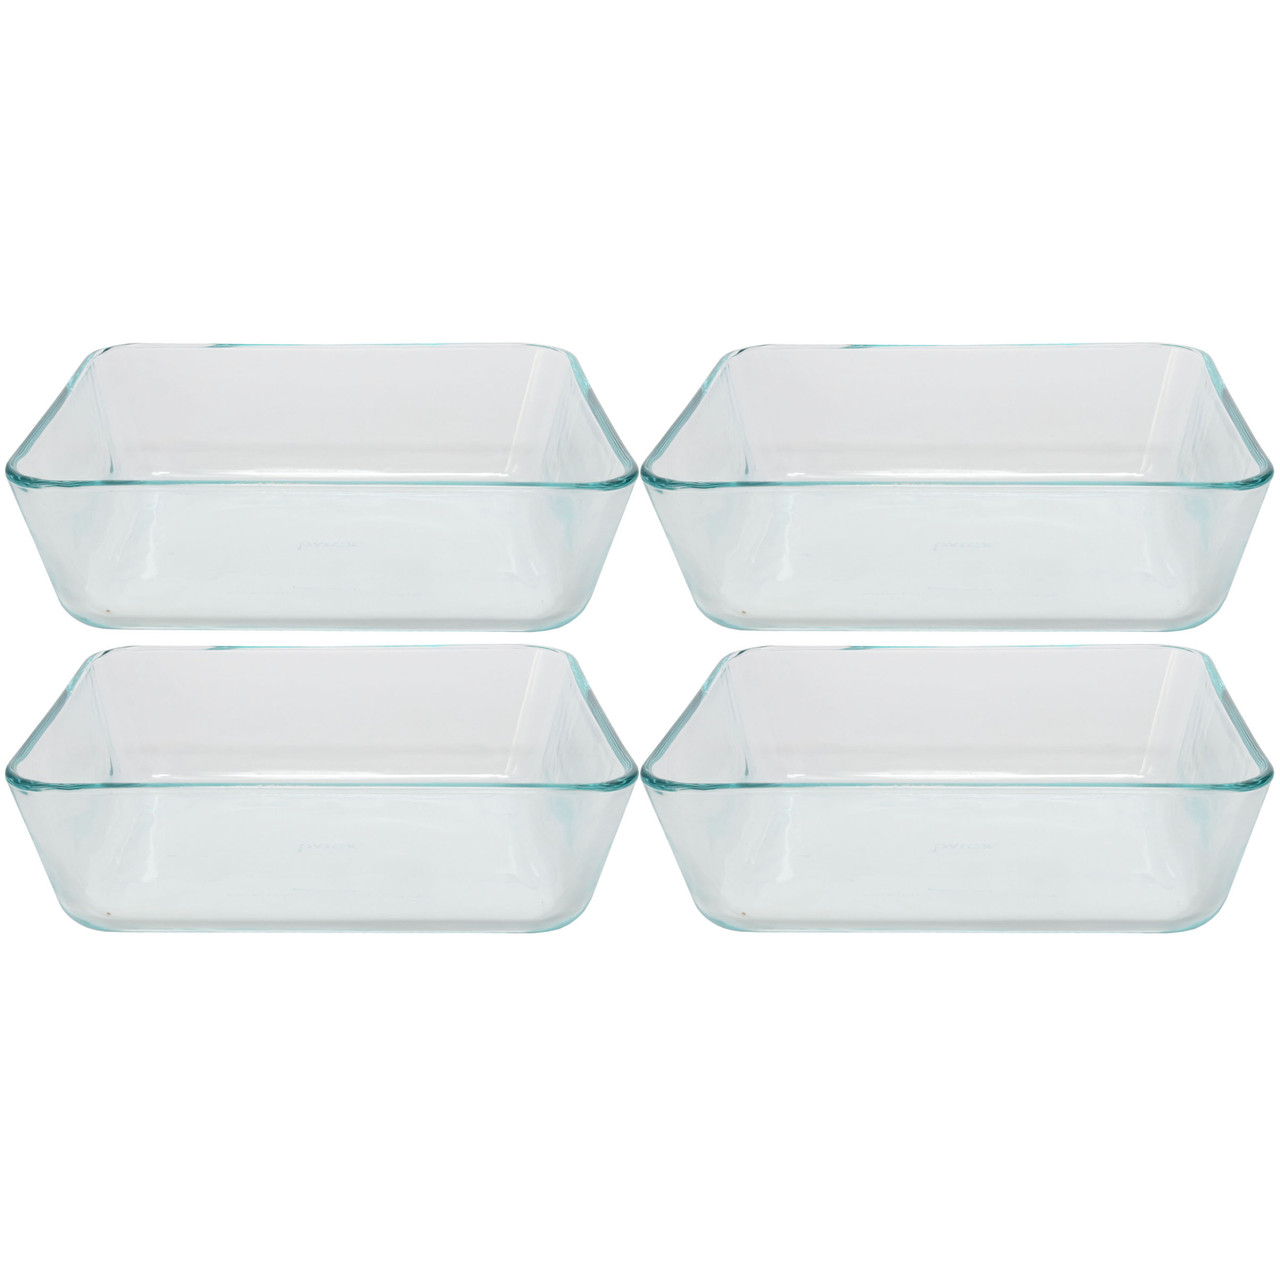 Pyrex 7211 6-Cup Rectangle Glass Food Storage Dish w/ 7211-PC Edamame Green Lid Cover (2-Pack)